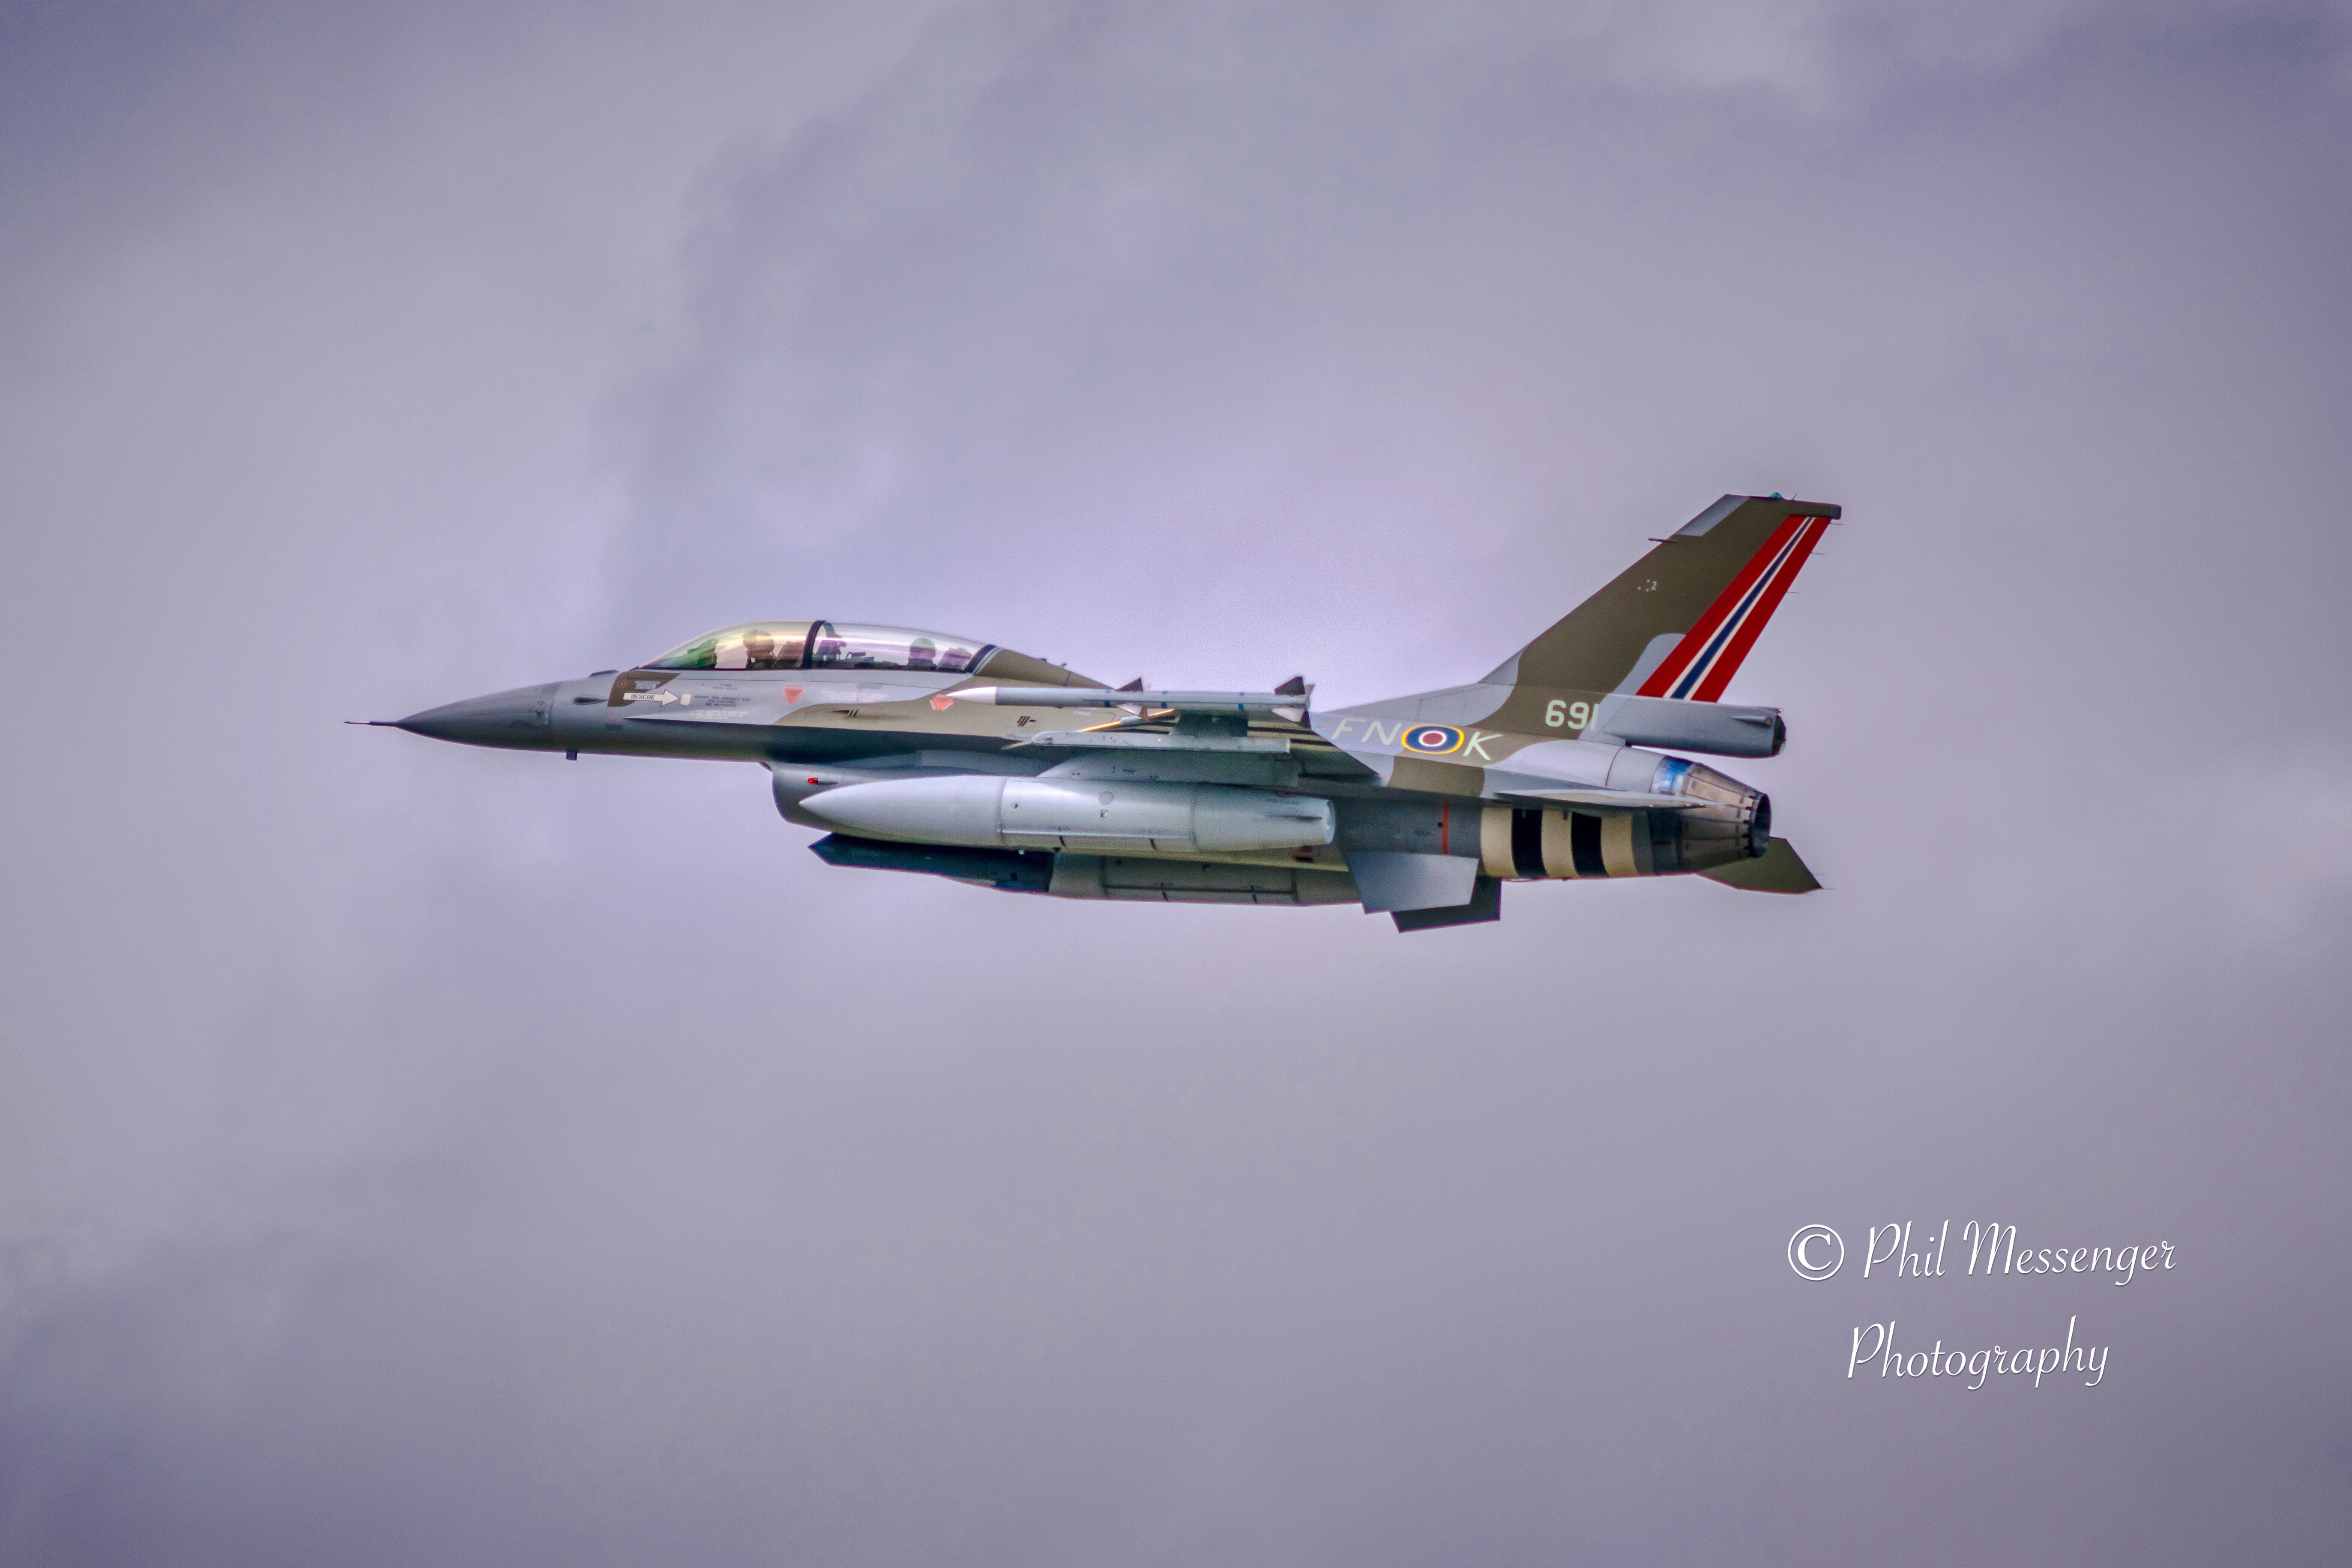 Norwegian F-16 special livery for 75th anniversary of D-Day landings.